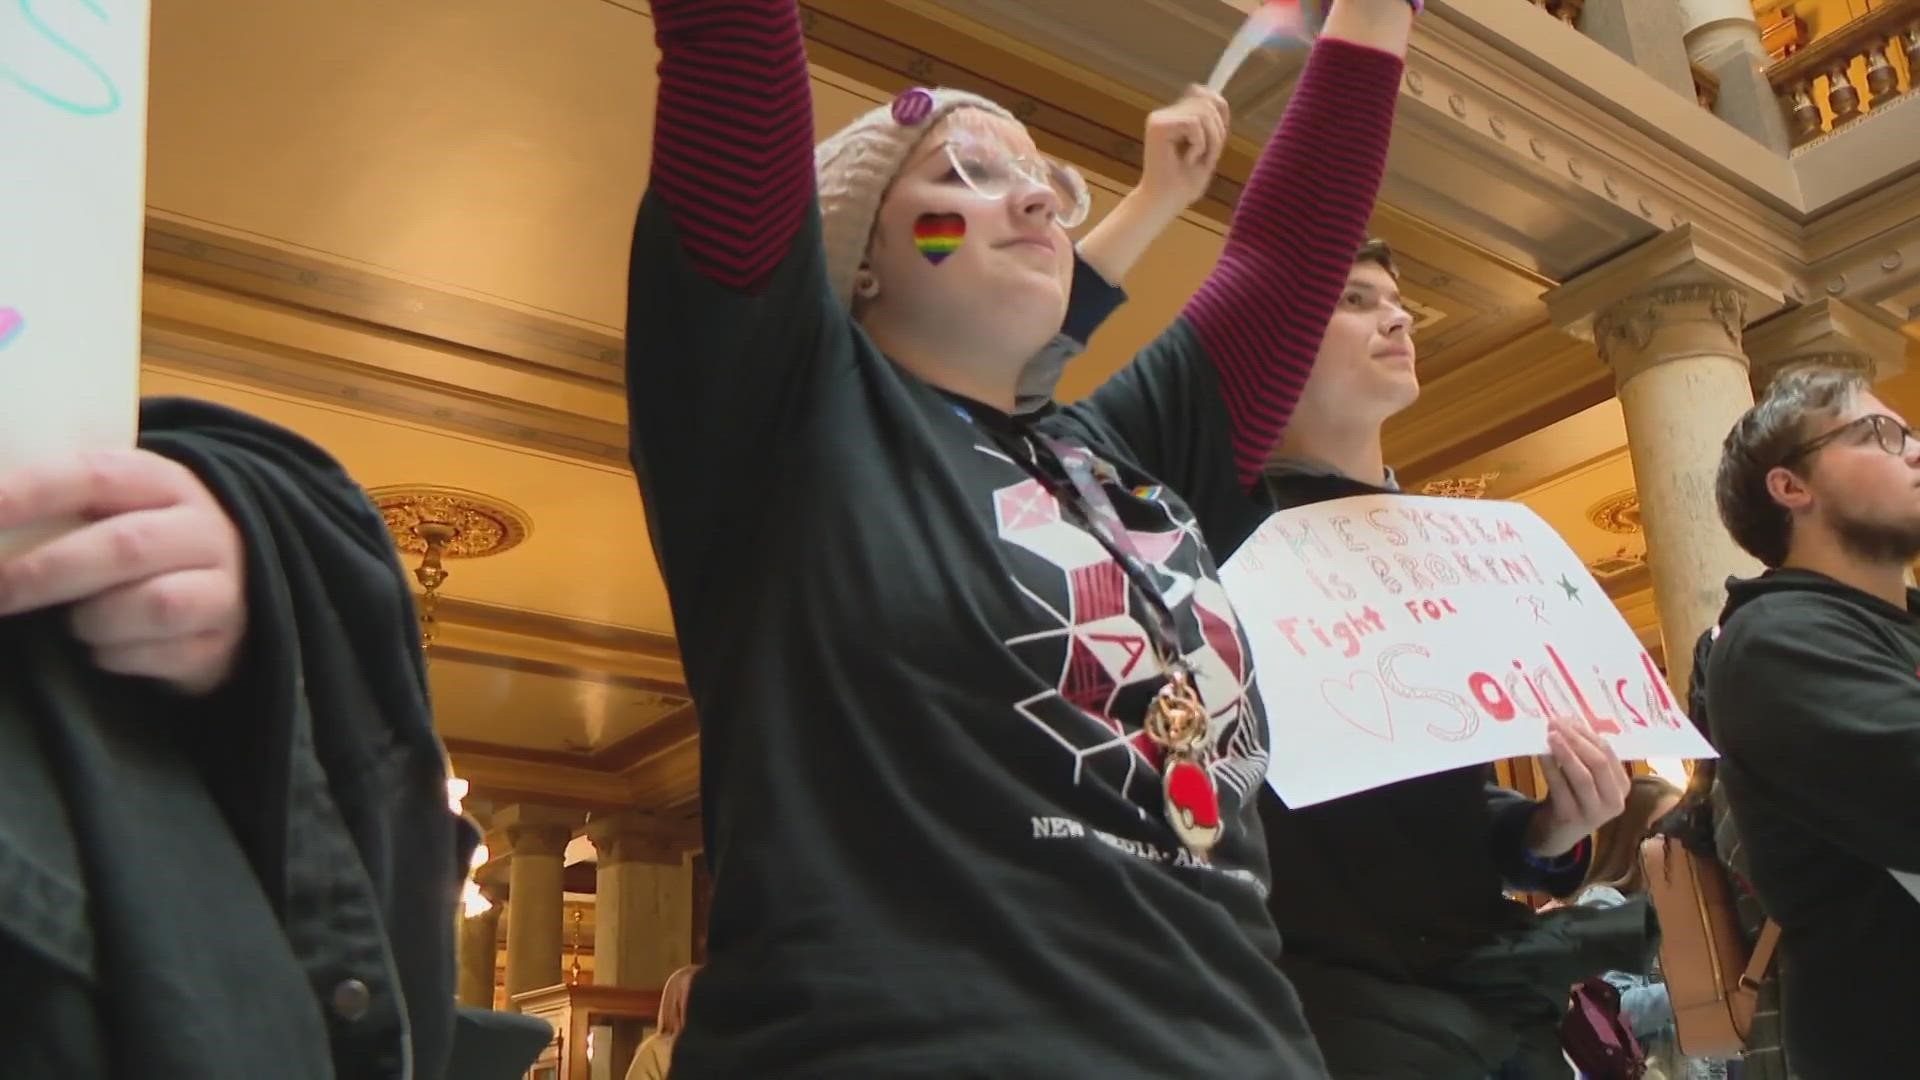 Protestors gathered at the statehouse to protest the 'slate of hate' legislation targeting the rights of queer and LGBTQ+ youth.